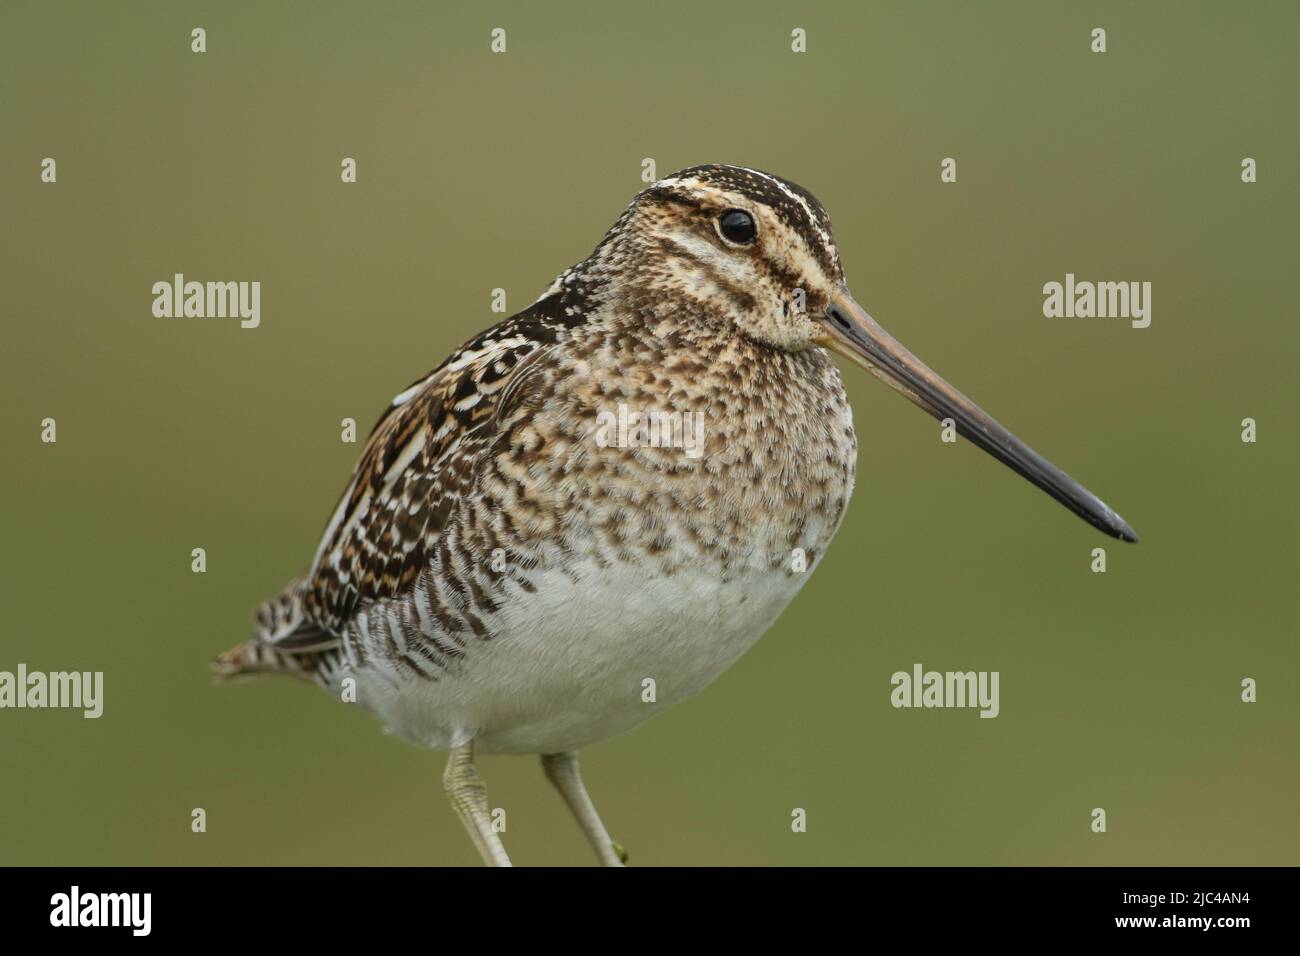 A head shot of a magnificent Snipe, Gallinago gallinago, in the moors of Durham, UK. Stock Photo